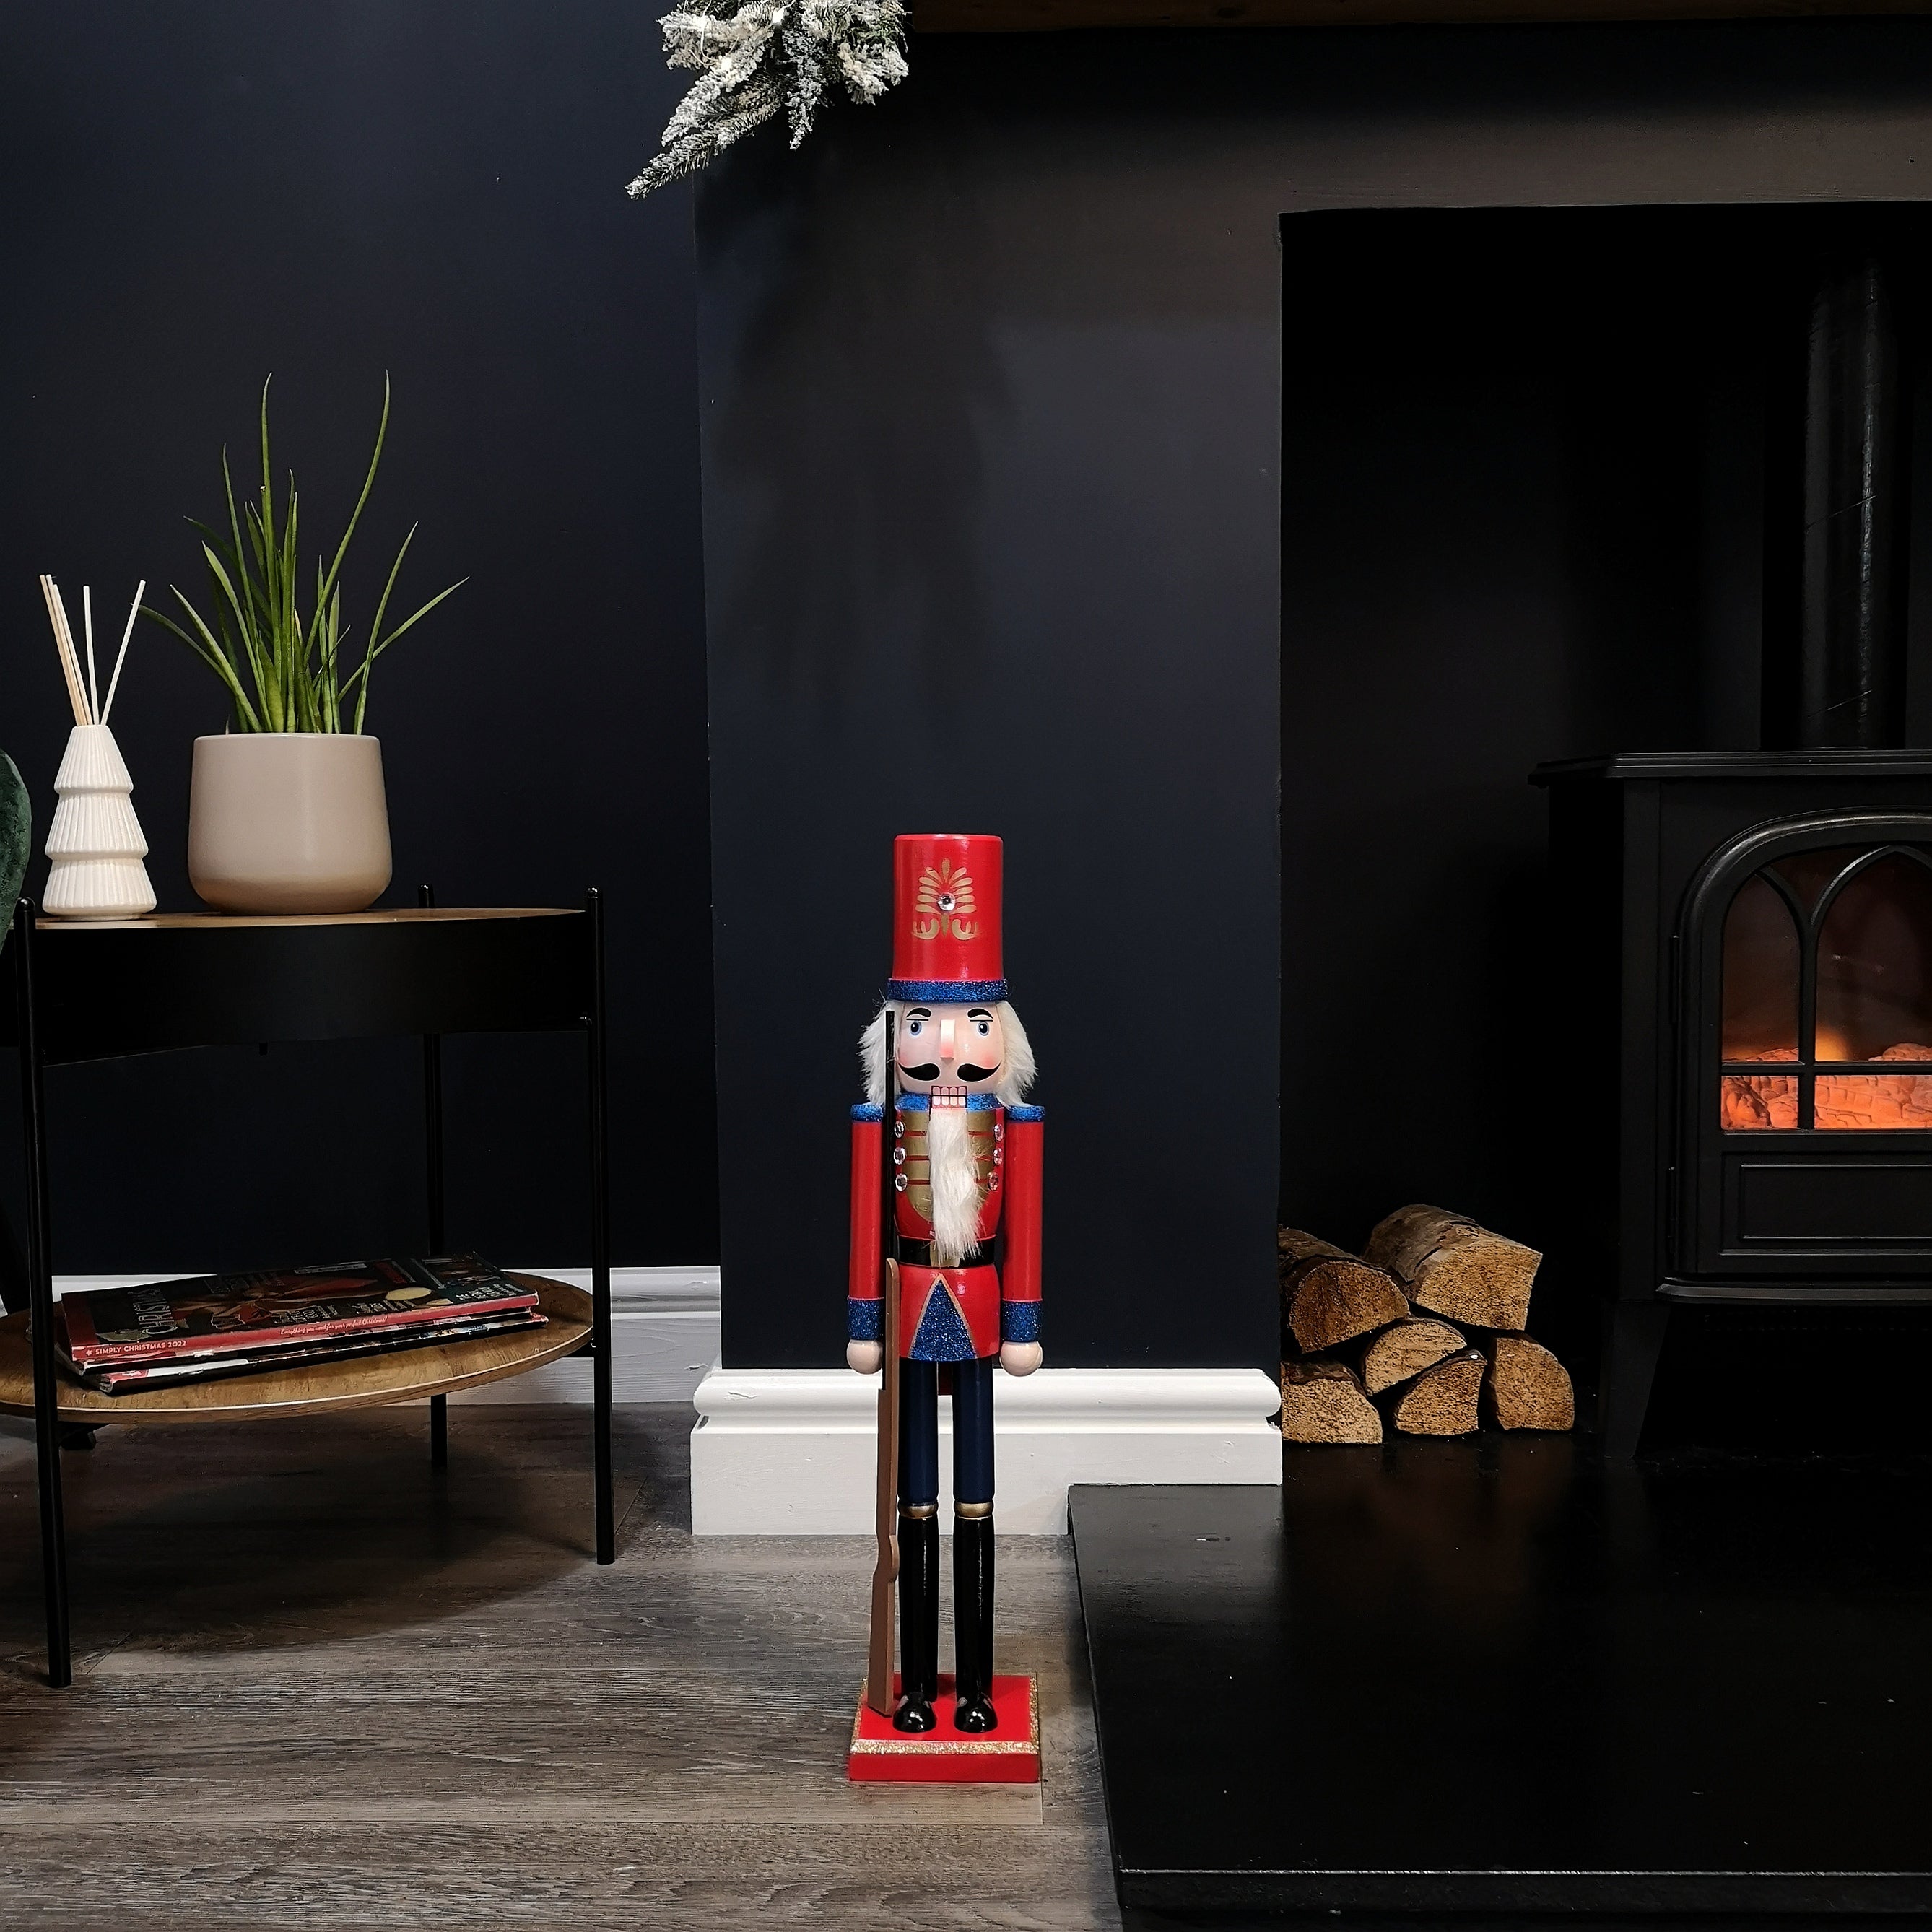 50cm Indoor Traditional Wooden Christmas Nutcracker Decoration in Red & Blue